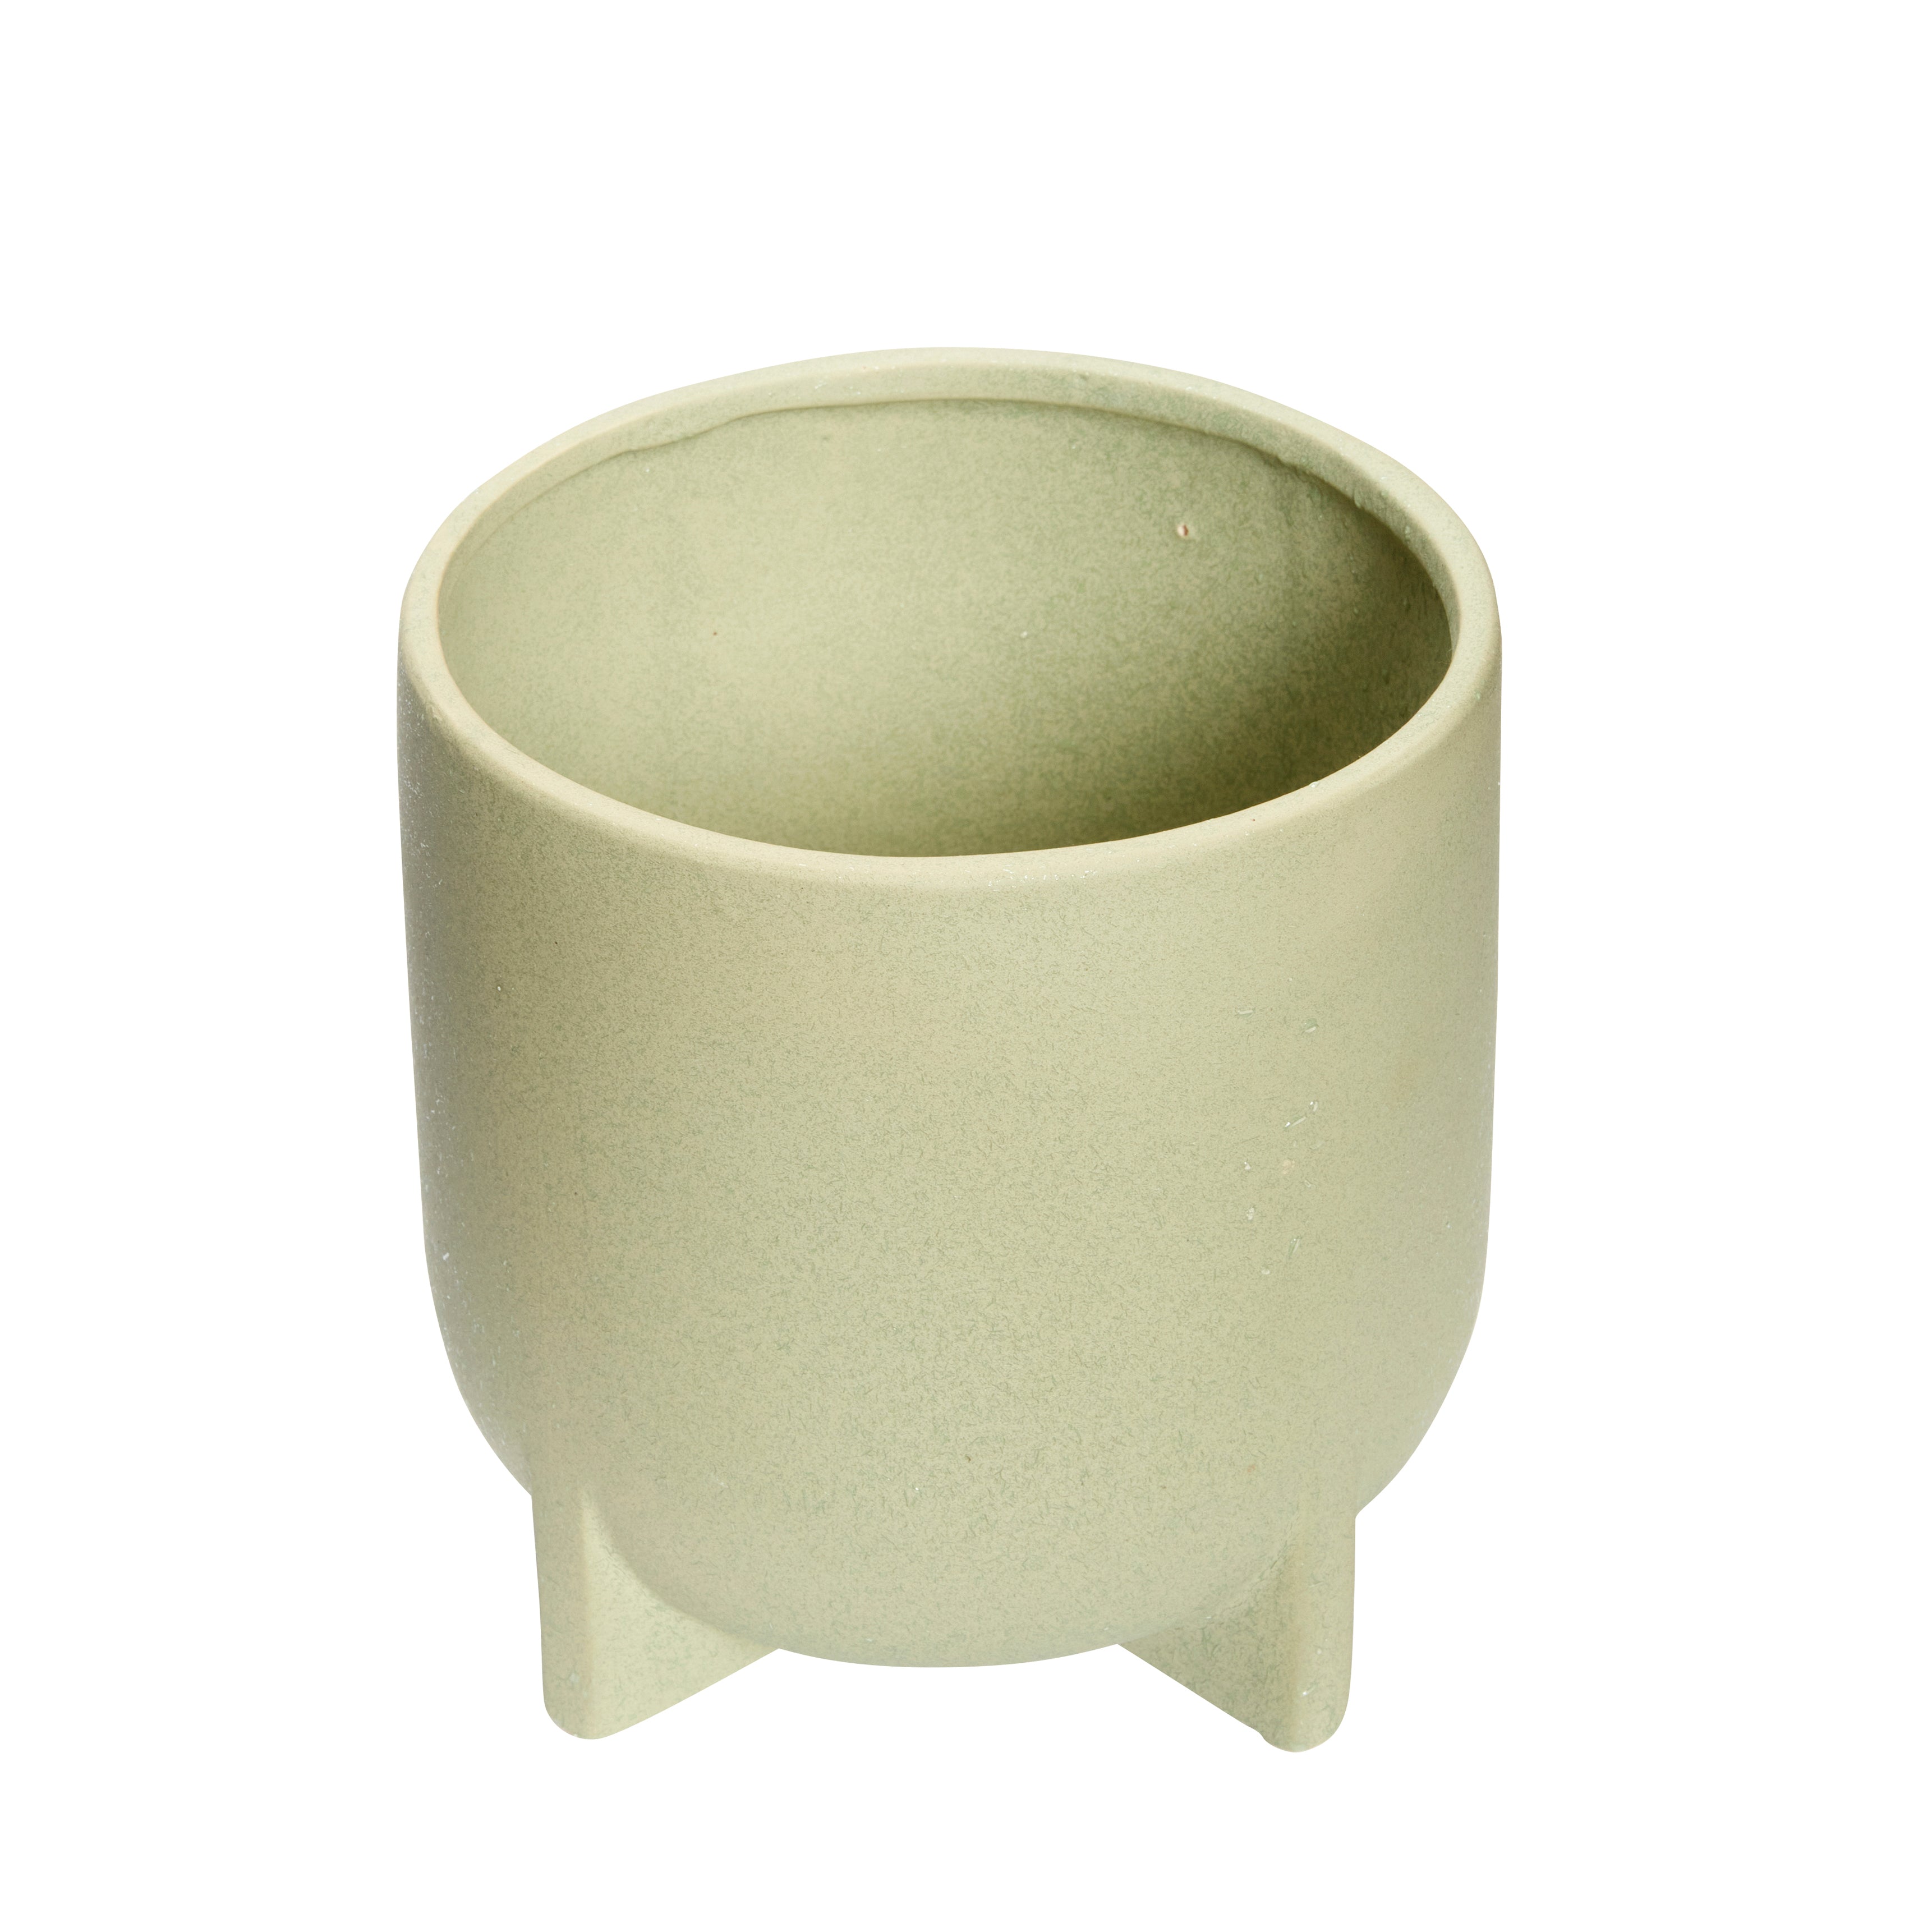 Mint Ceramic Pot with Legs in Large